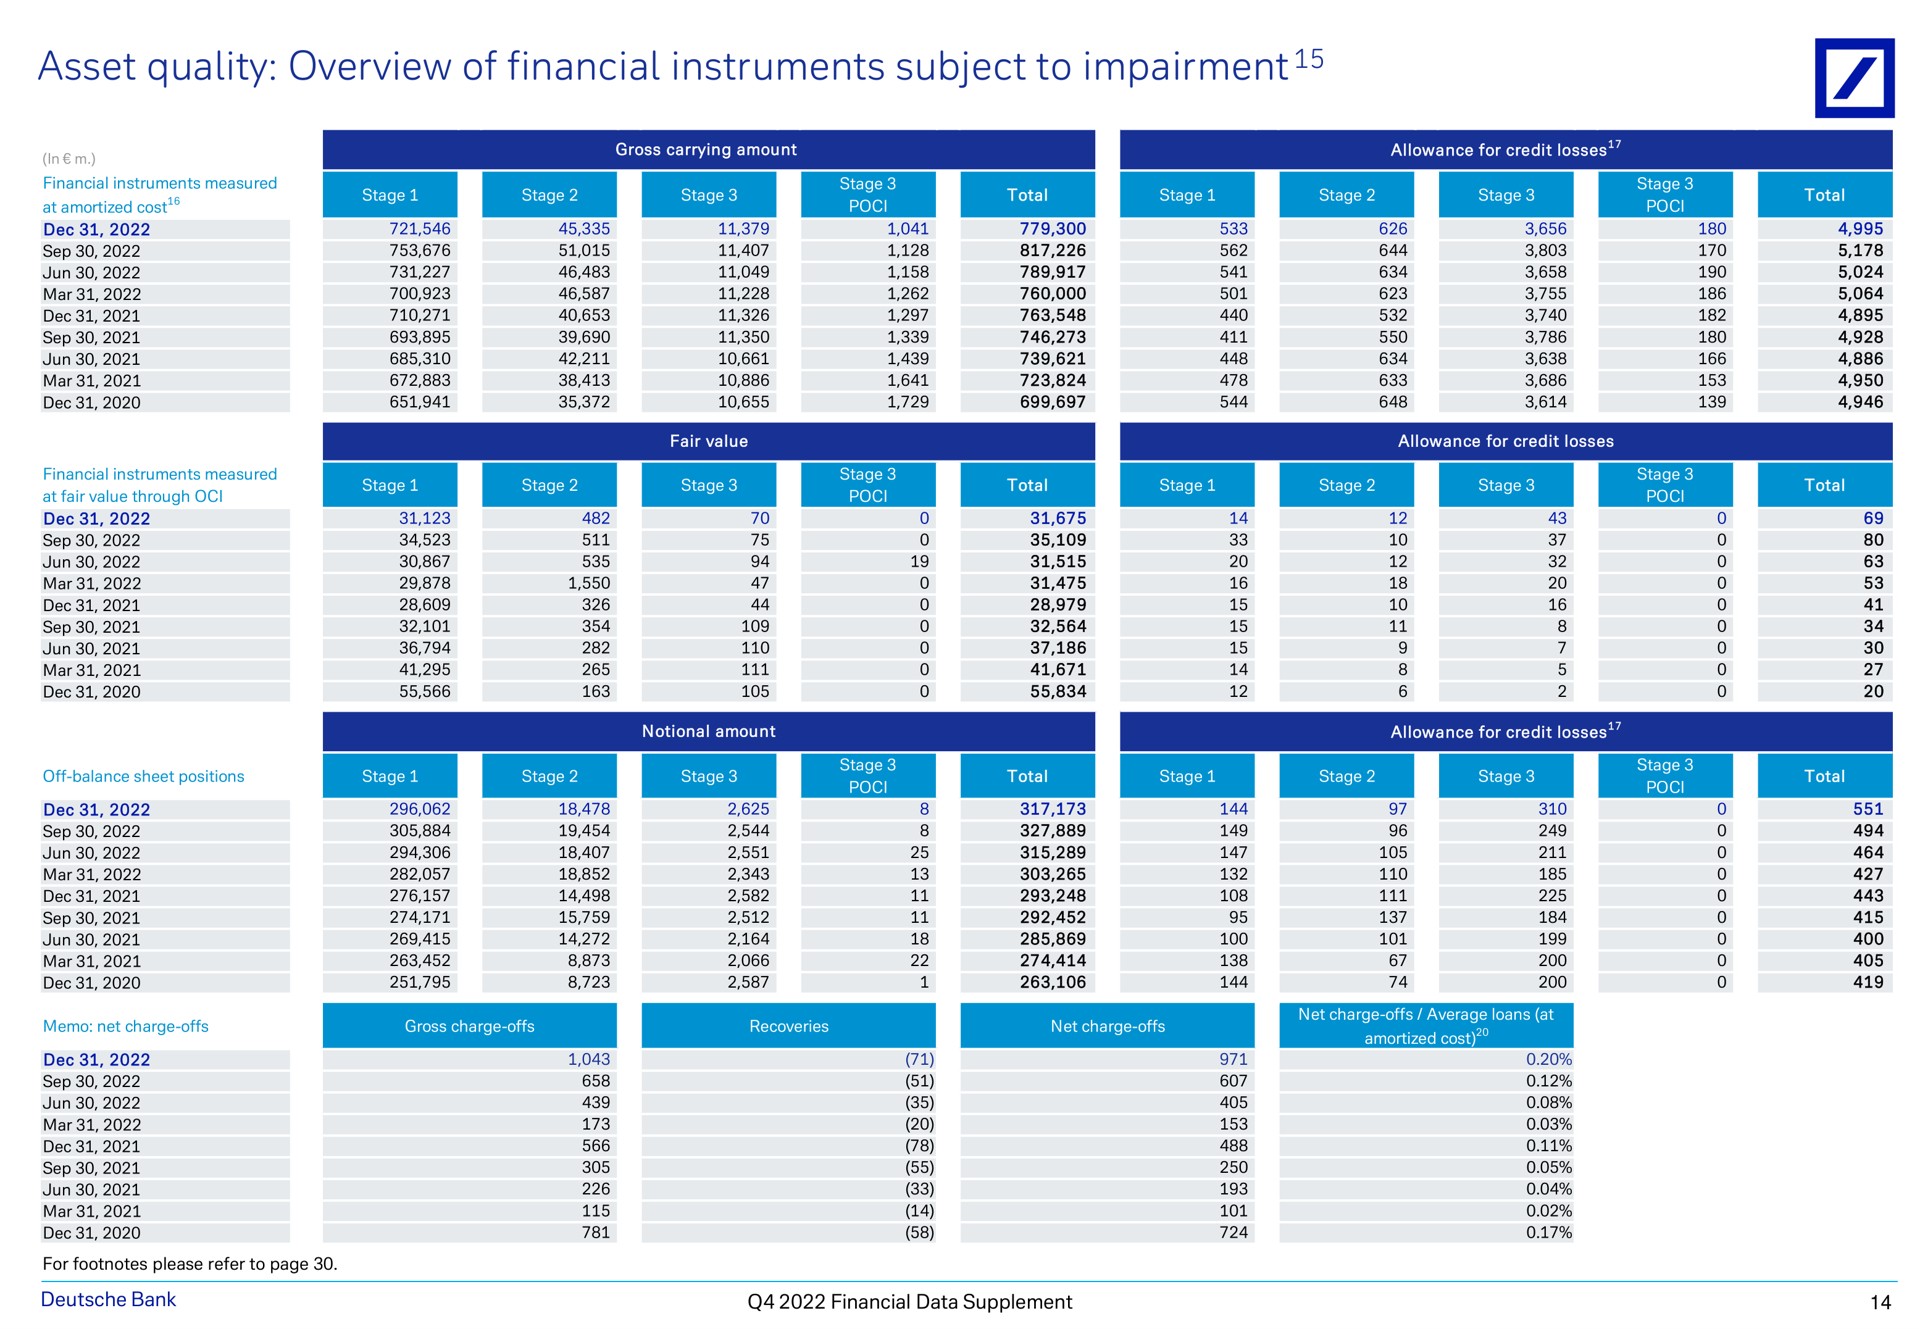 asset quality overview of financial instruments subject to impairment a bank data supplement | Deutsche Bank